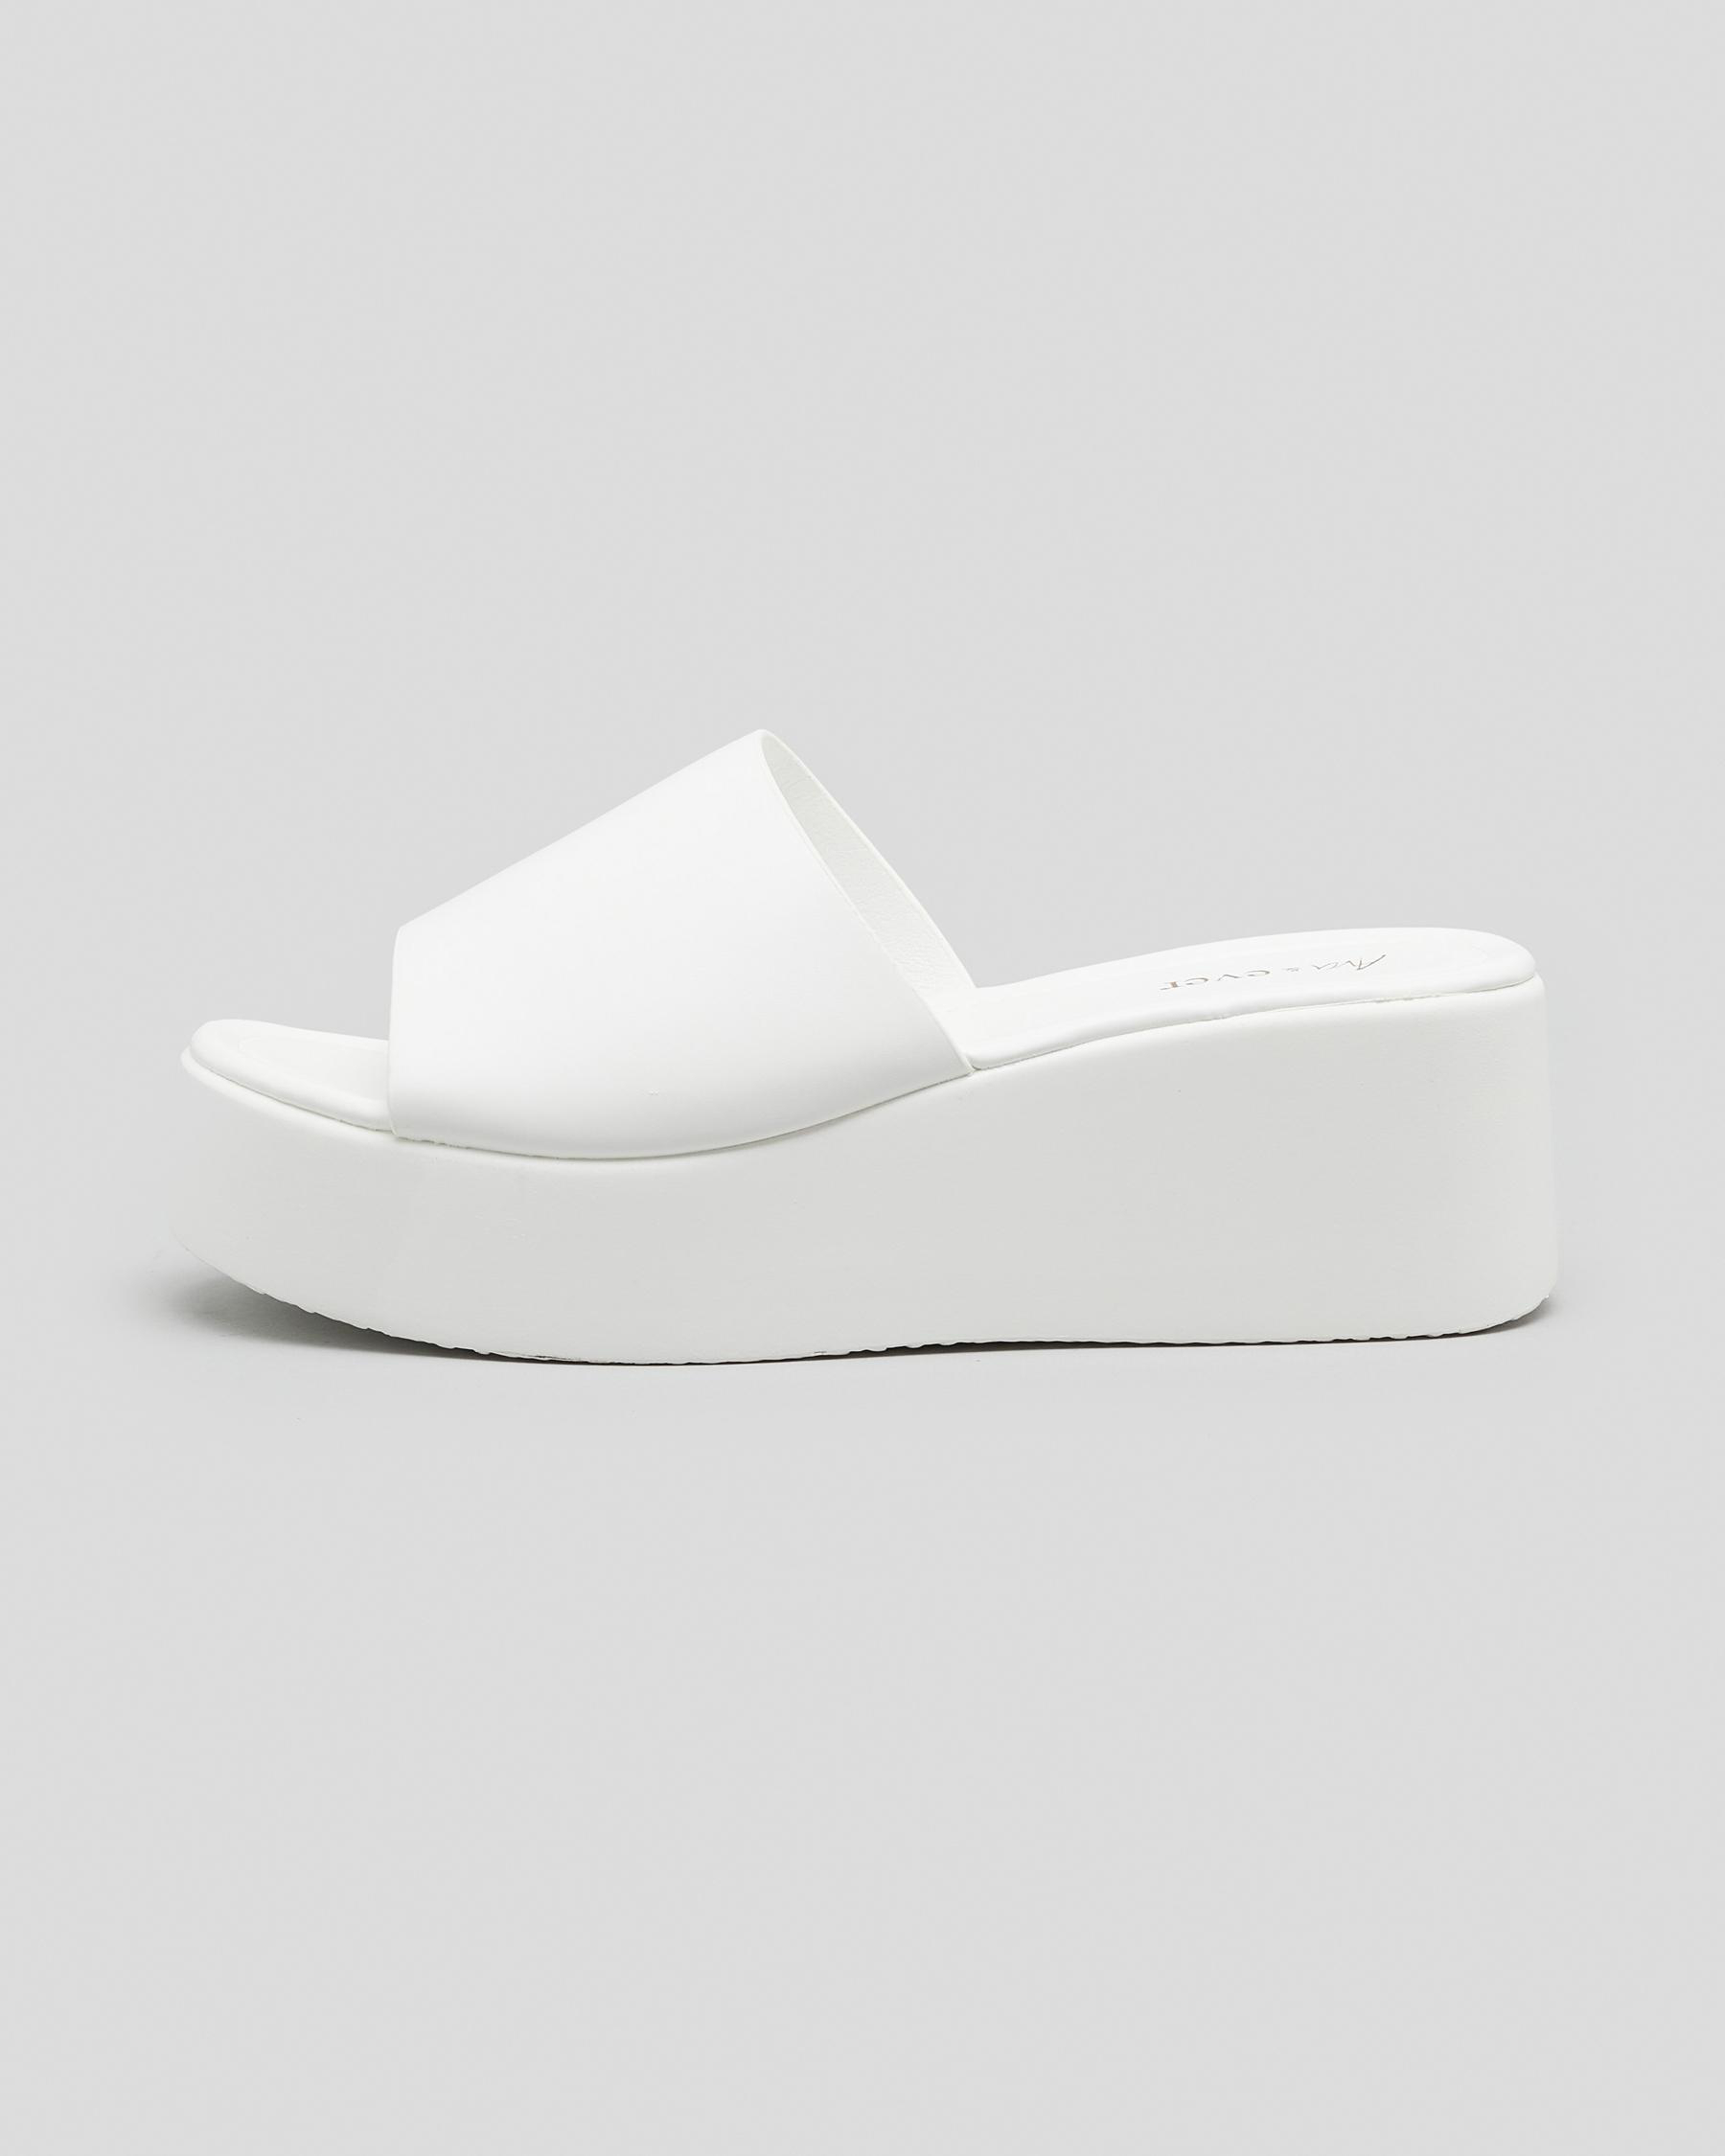 Shop Ava And Ever Cass Platform Shoes In White - Fast Shipping & Easy ...